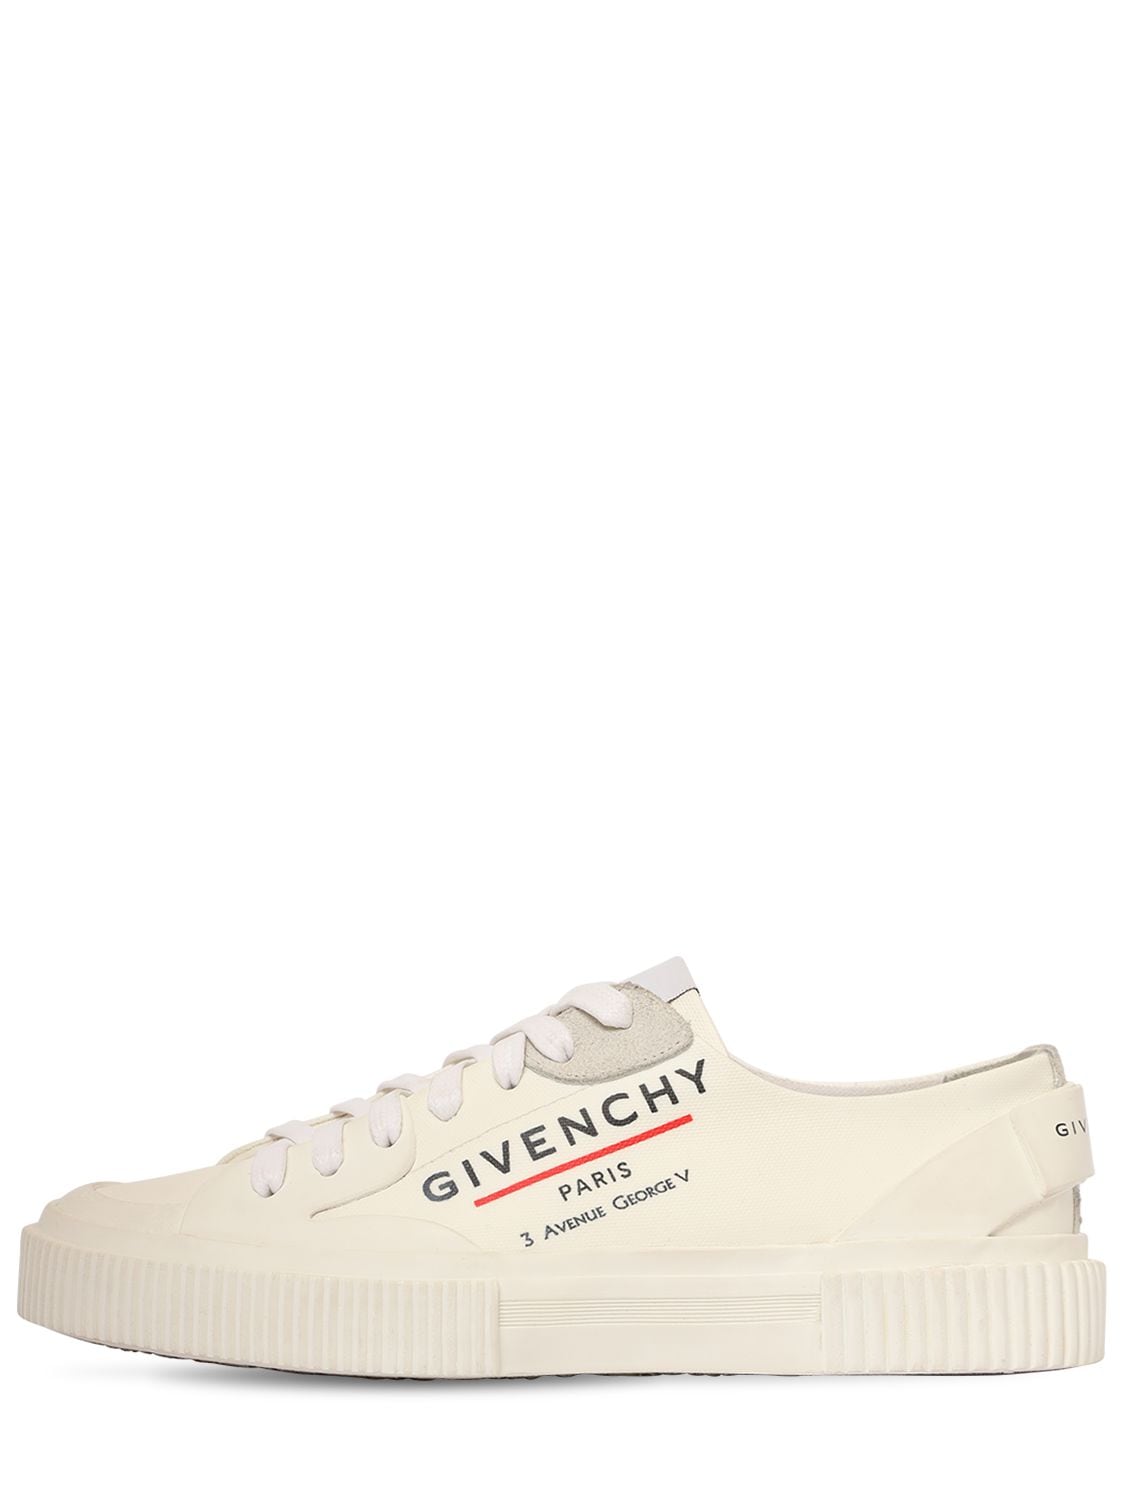 Givenchy 10mm Tennis Light Cotton Canvas Sneakers In White